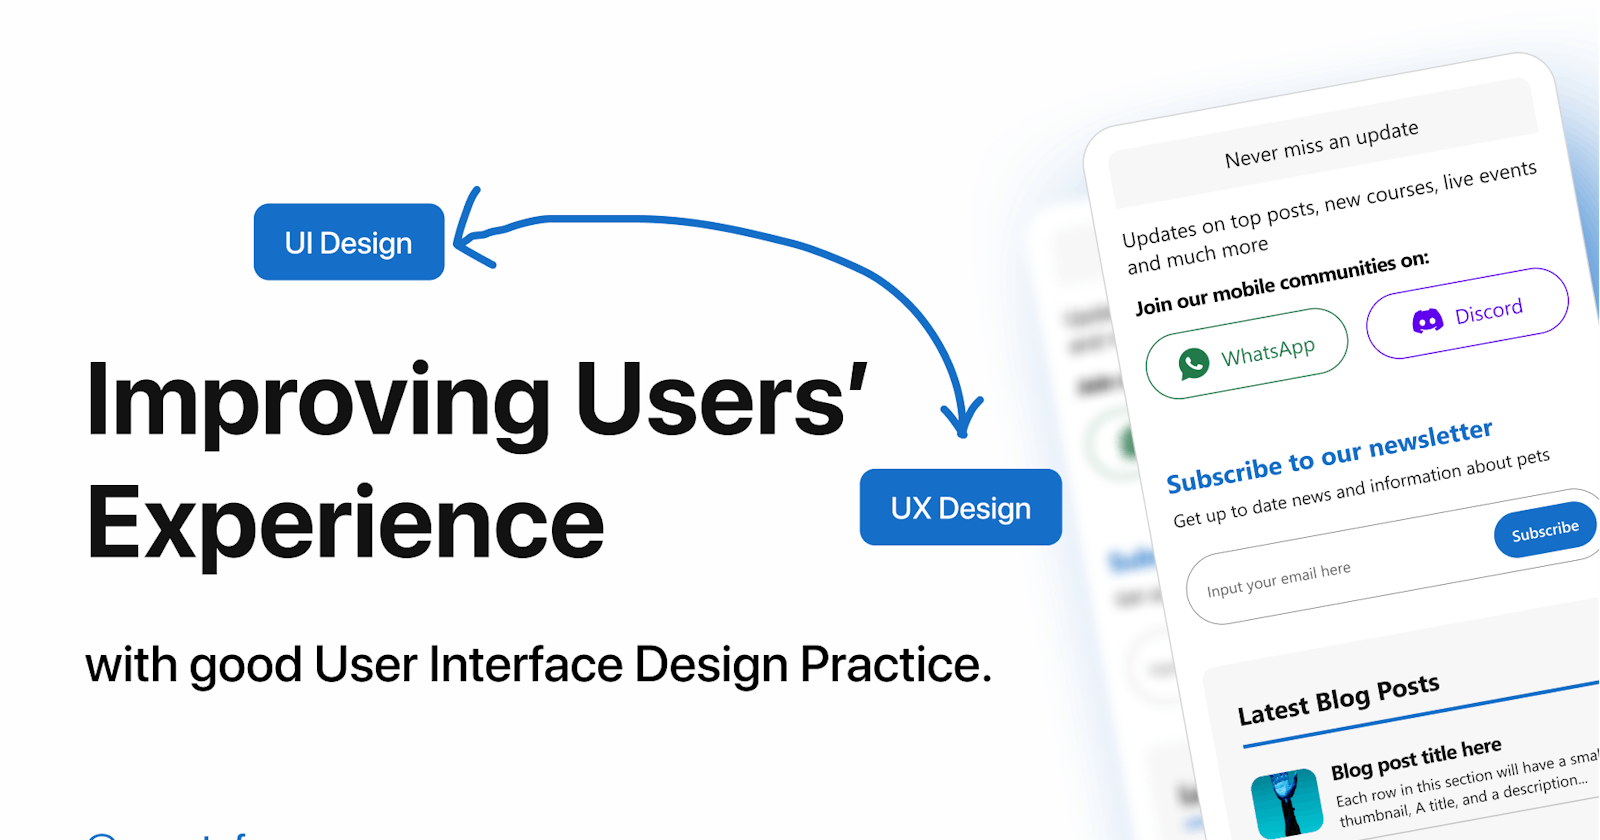 Improving user experience with good User Interface Design Practice.